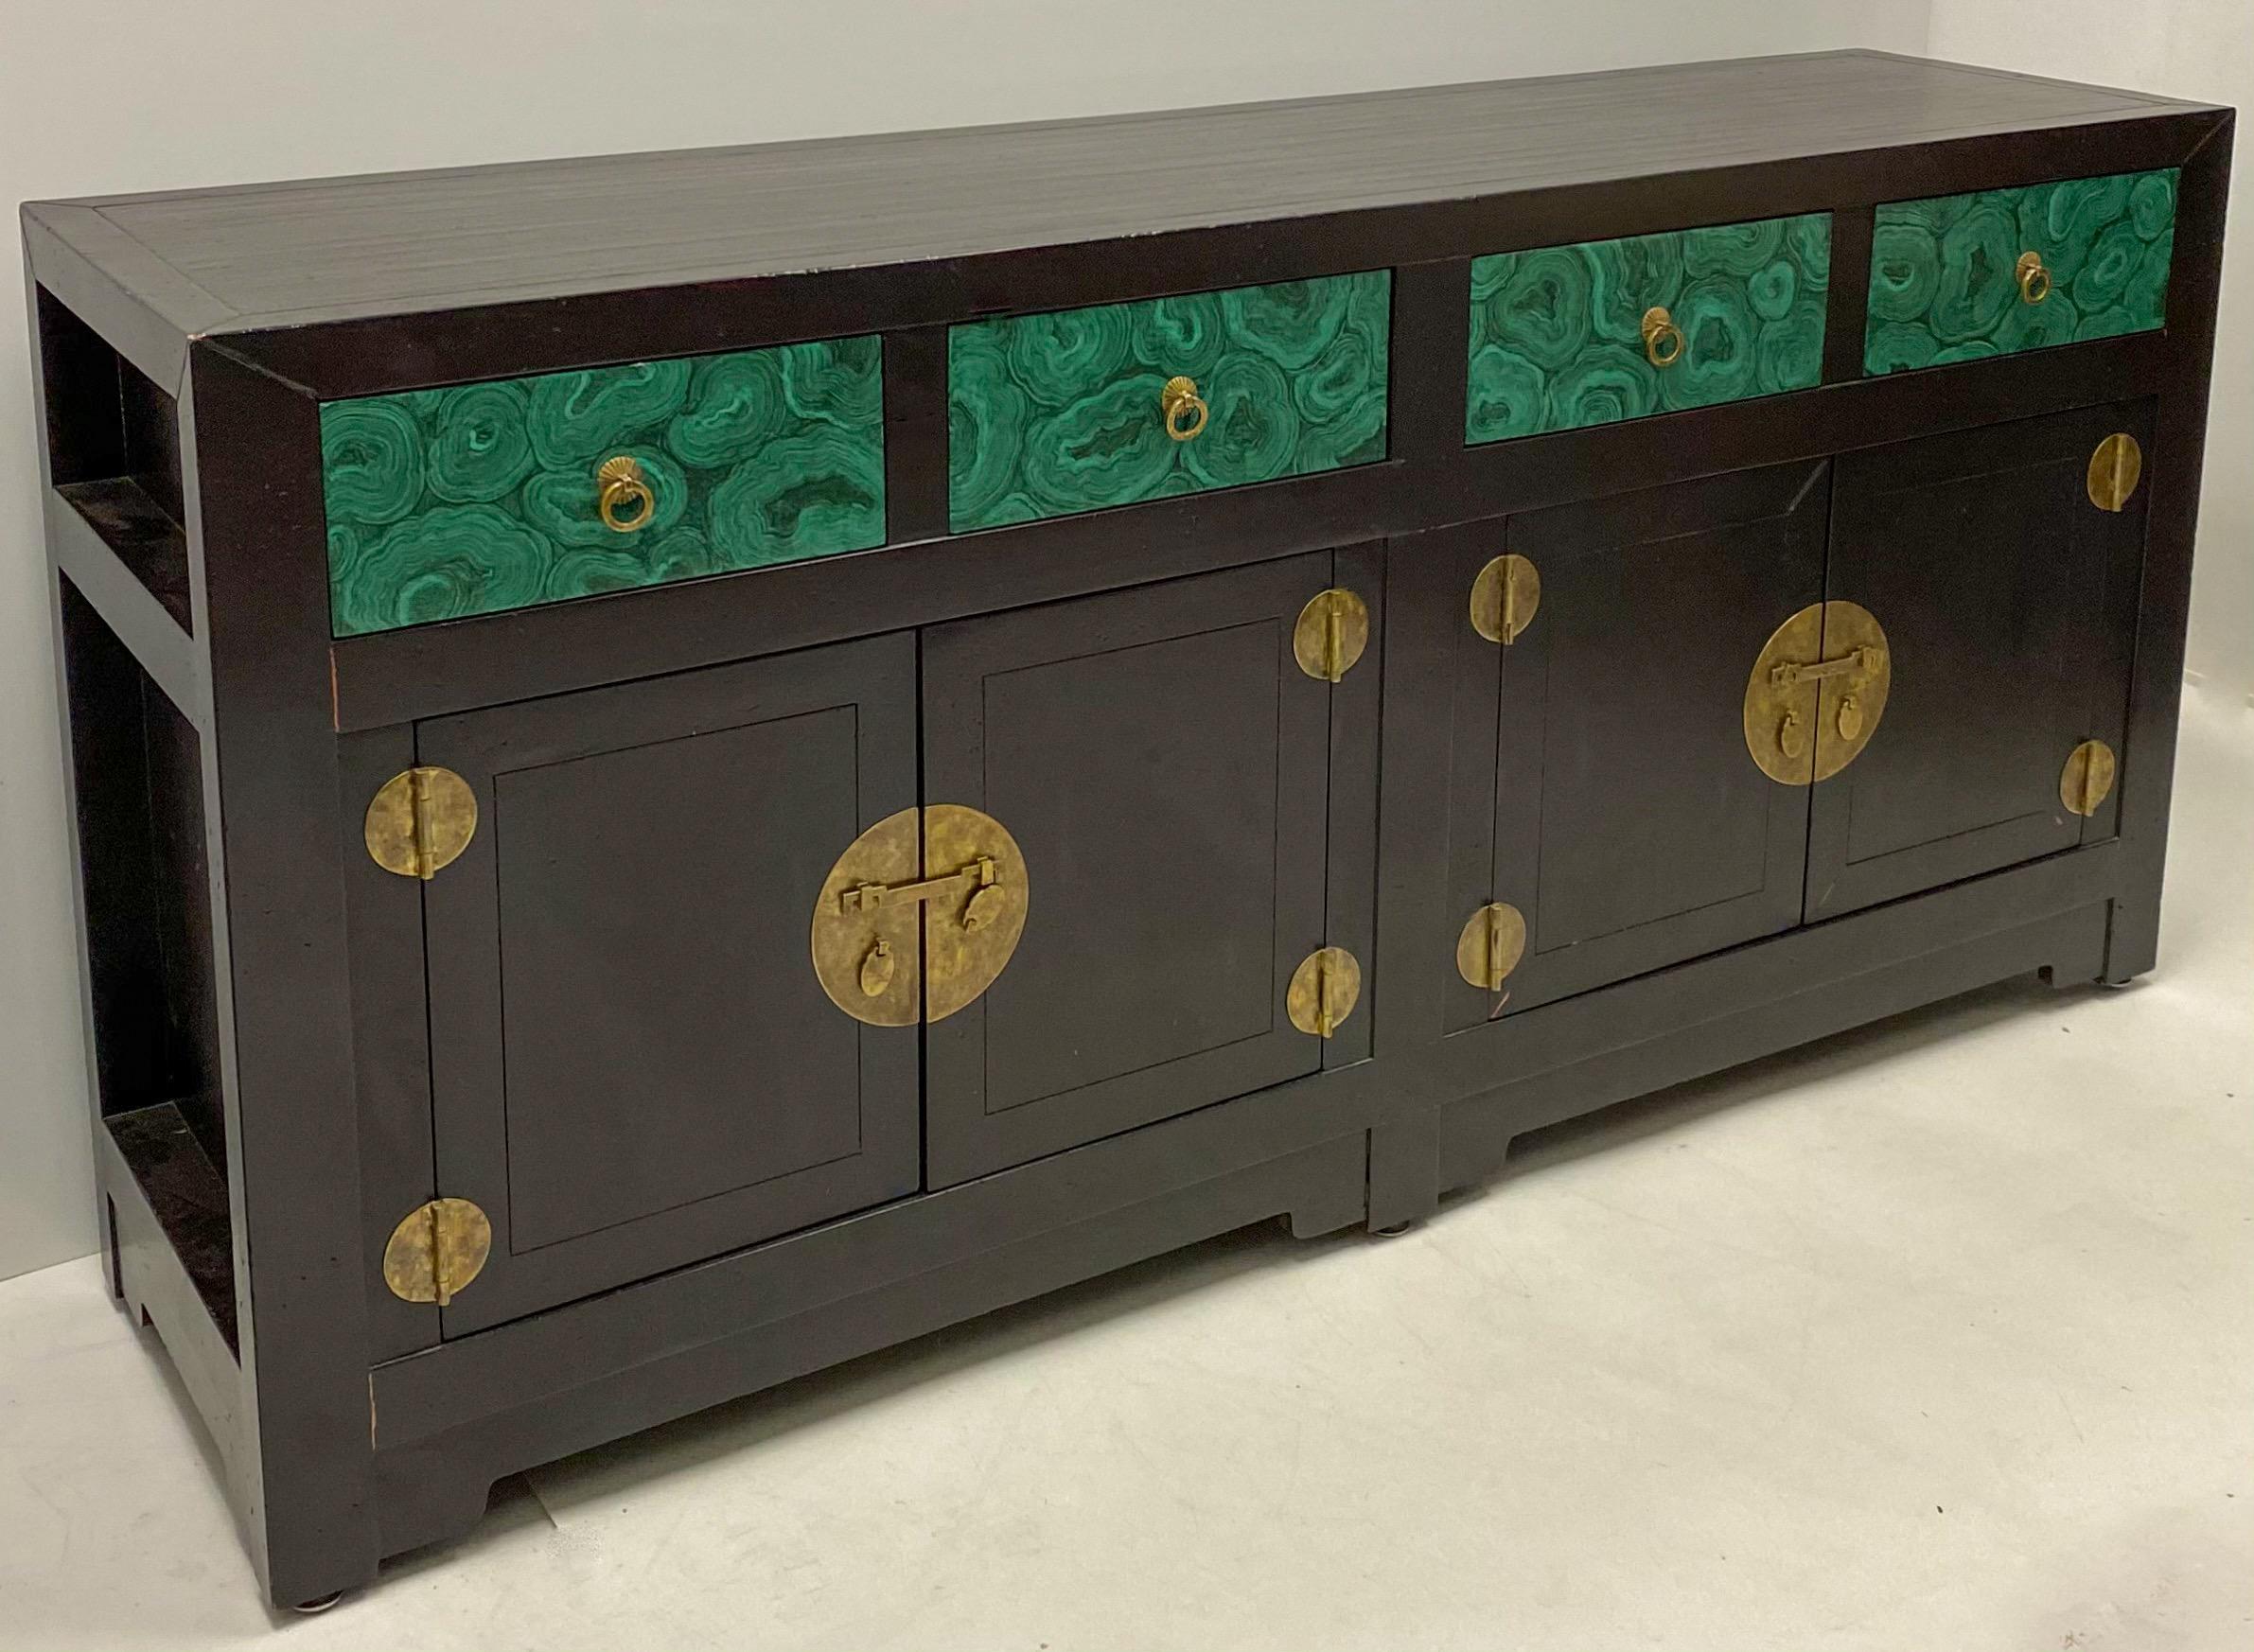 This is a large Asian style credenza by Henredon. It makes a bold decorating statement with it’s hand painted faux malachite drawer fronts. It is marked and in very good condition.